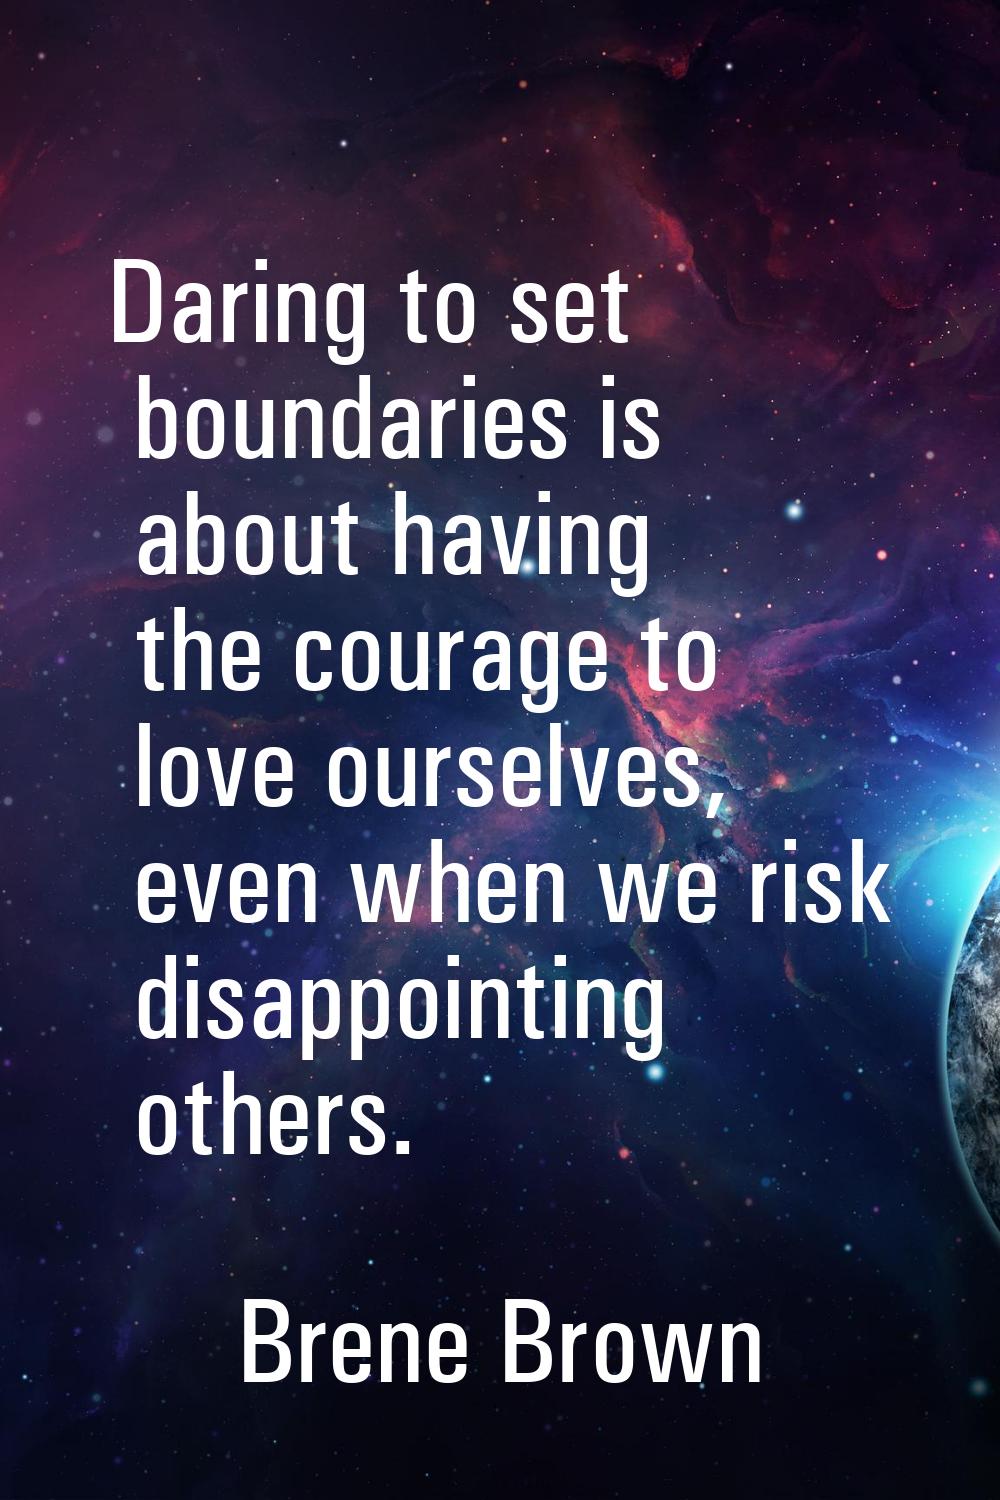 Daring to set boundaries is about having the courage to love ourselves, even when we risk disappoin